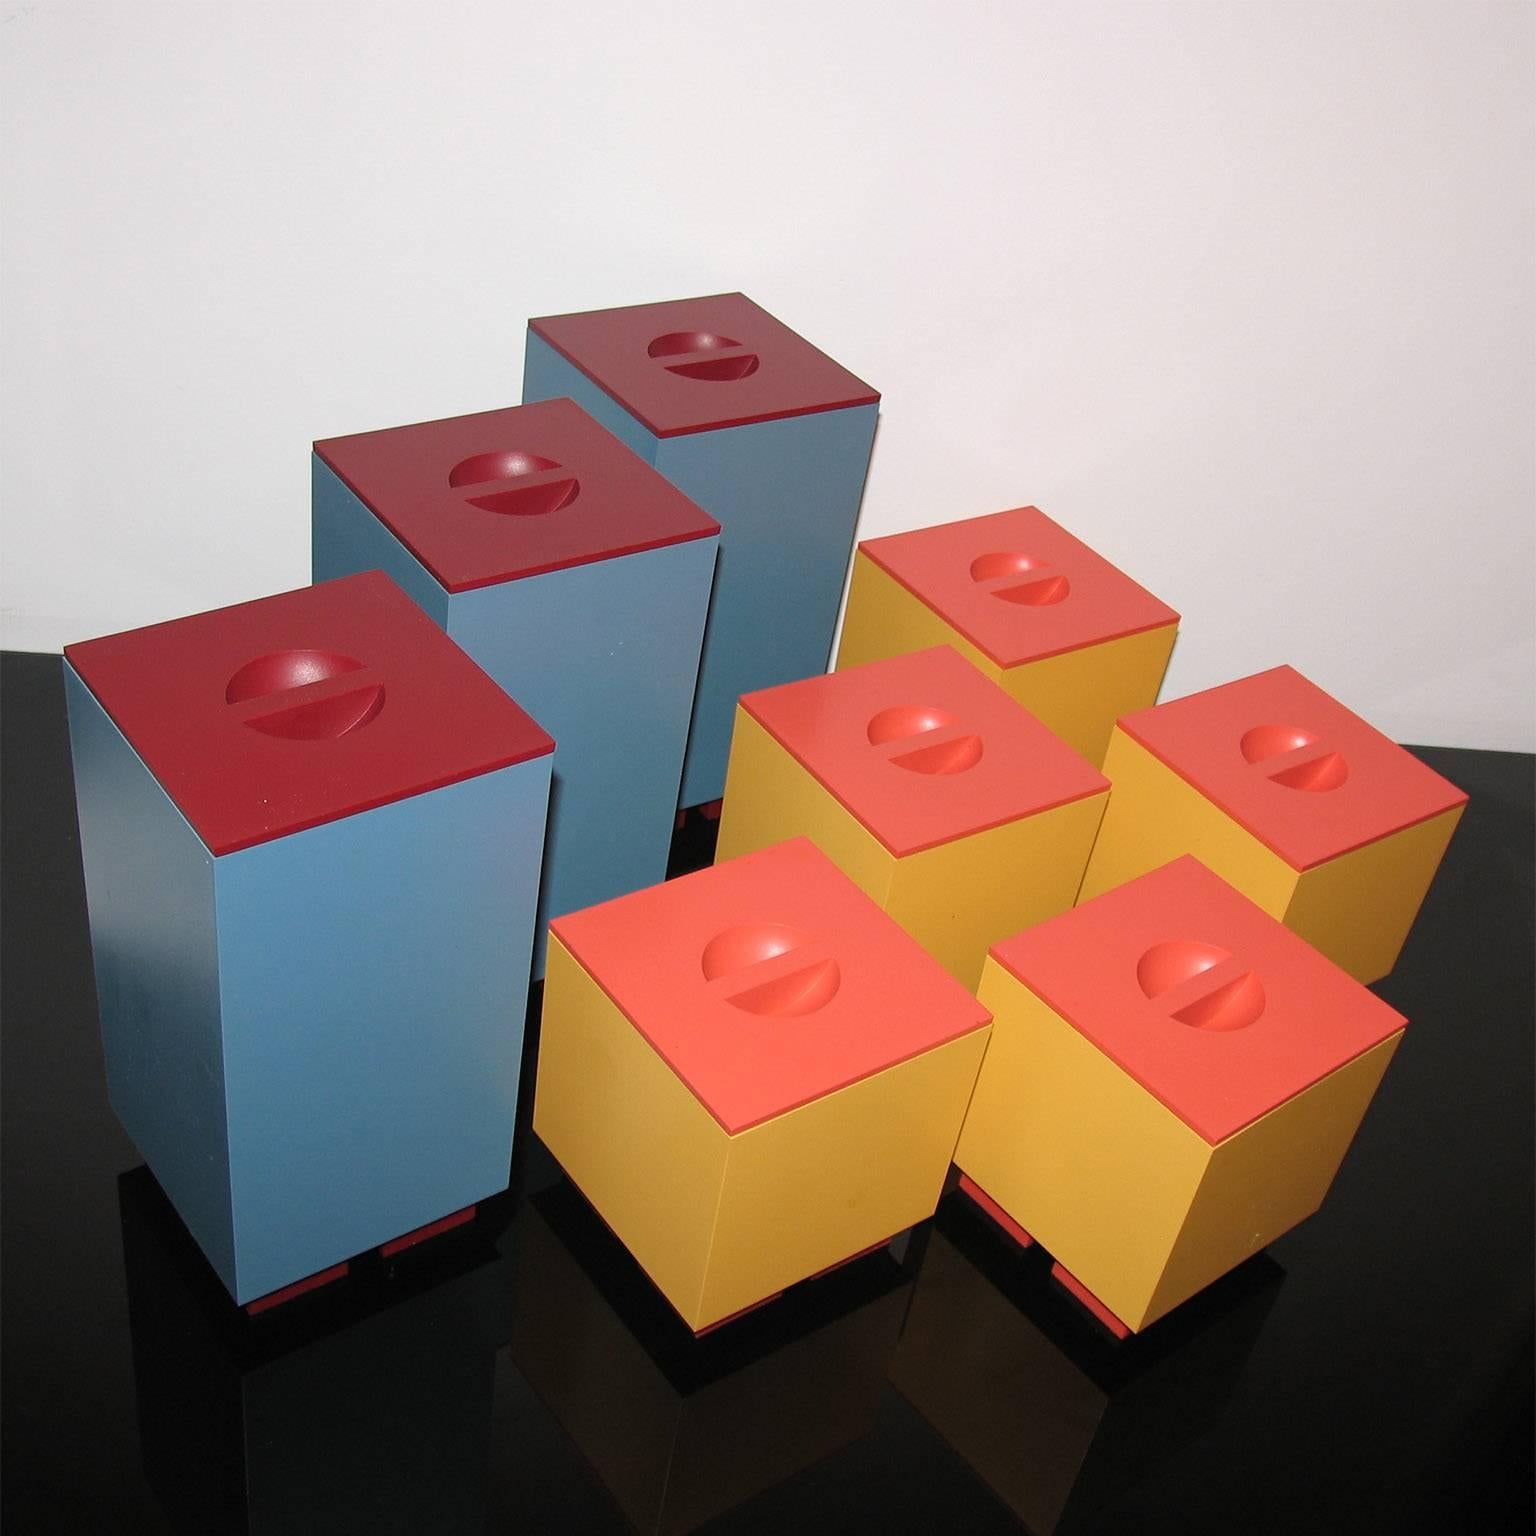 Alessi Euclid, Memphis series, Design Michael Graves, Italy, 1980s.
Boxes with covers, designed by Michael Graves for Alessi.
Three tall boxes in blue with dark red covers and feet.
Five shorter boxes in yellow with orange covers and feet.
Each